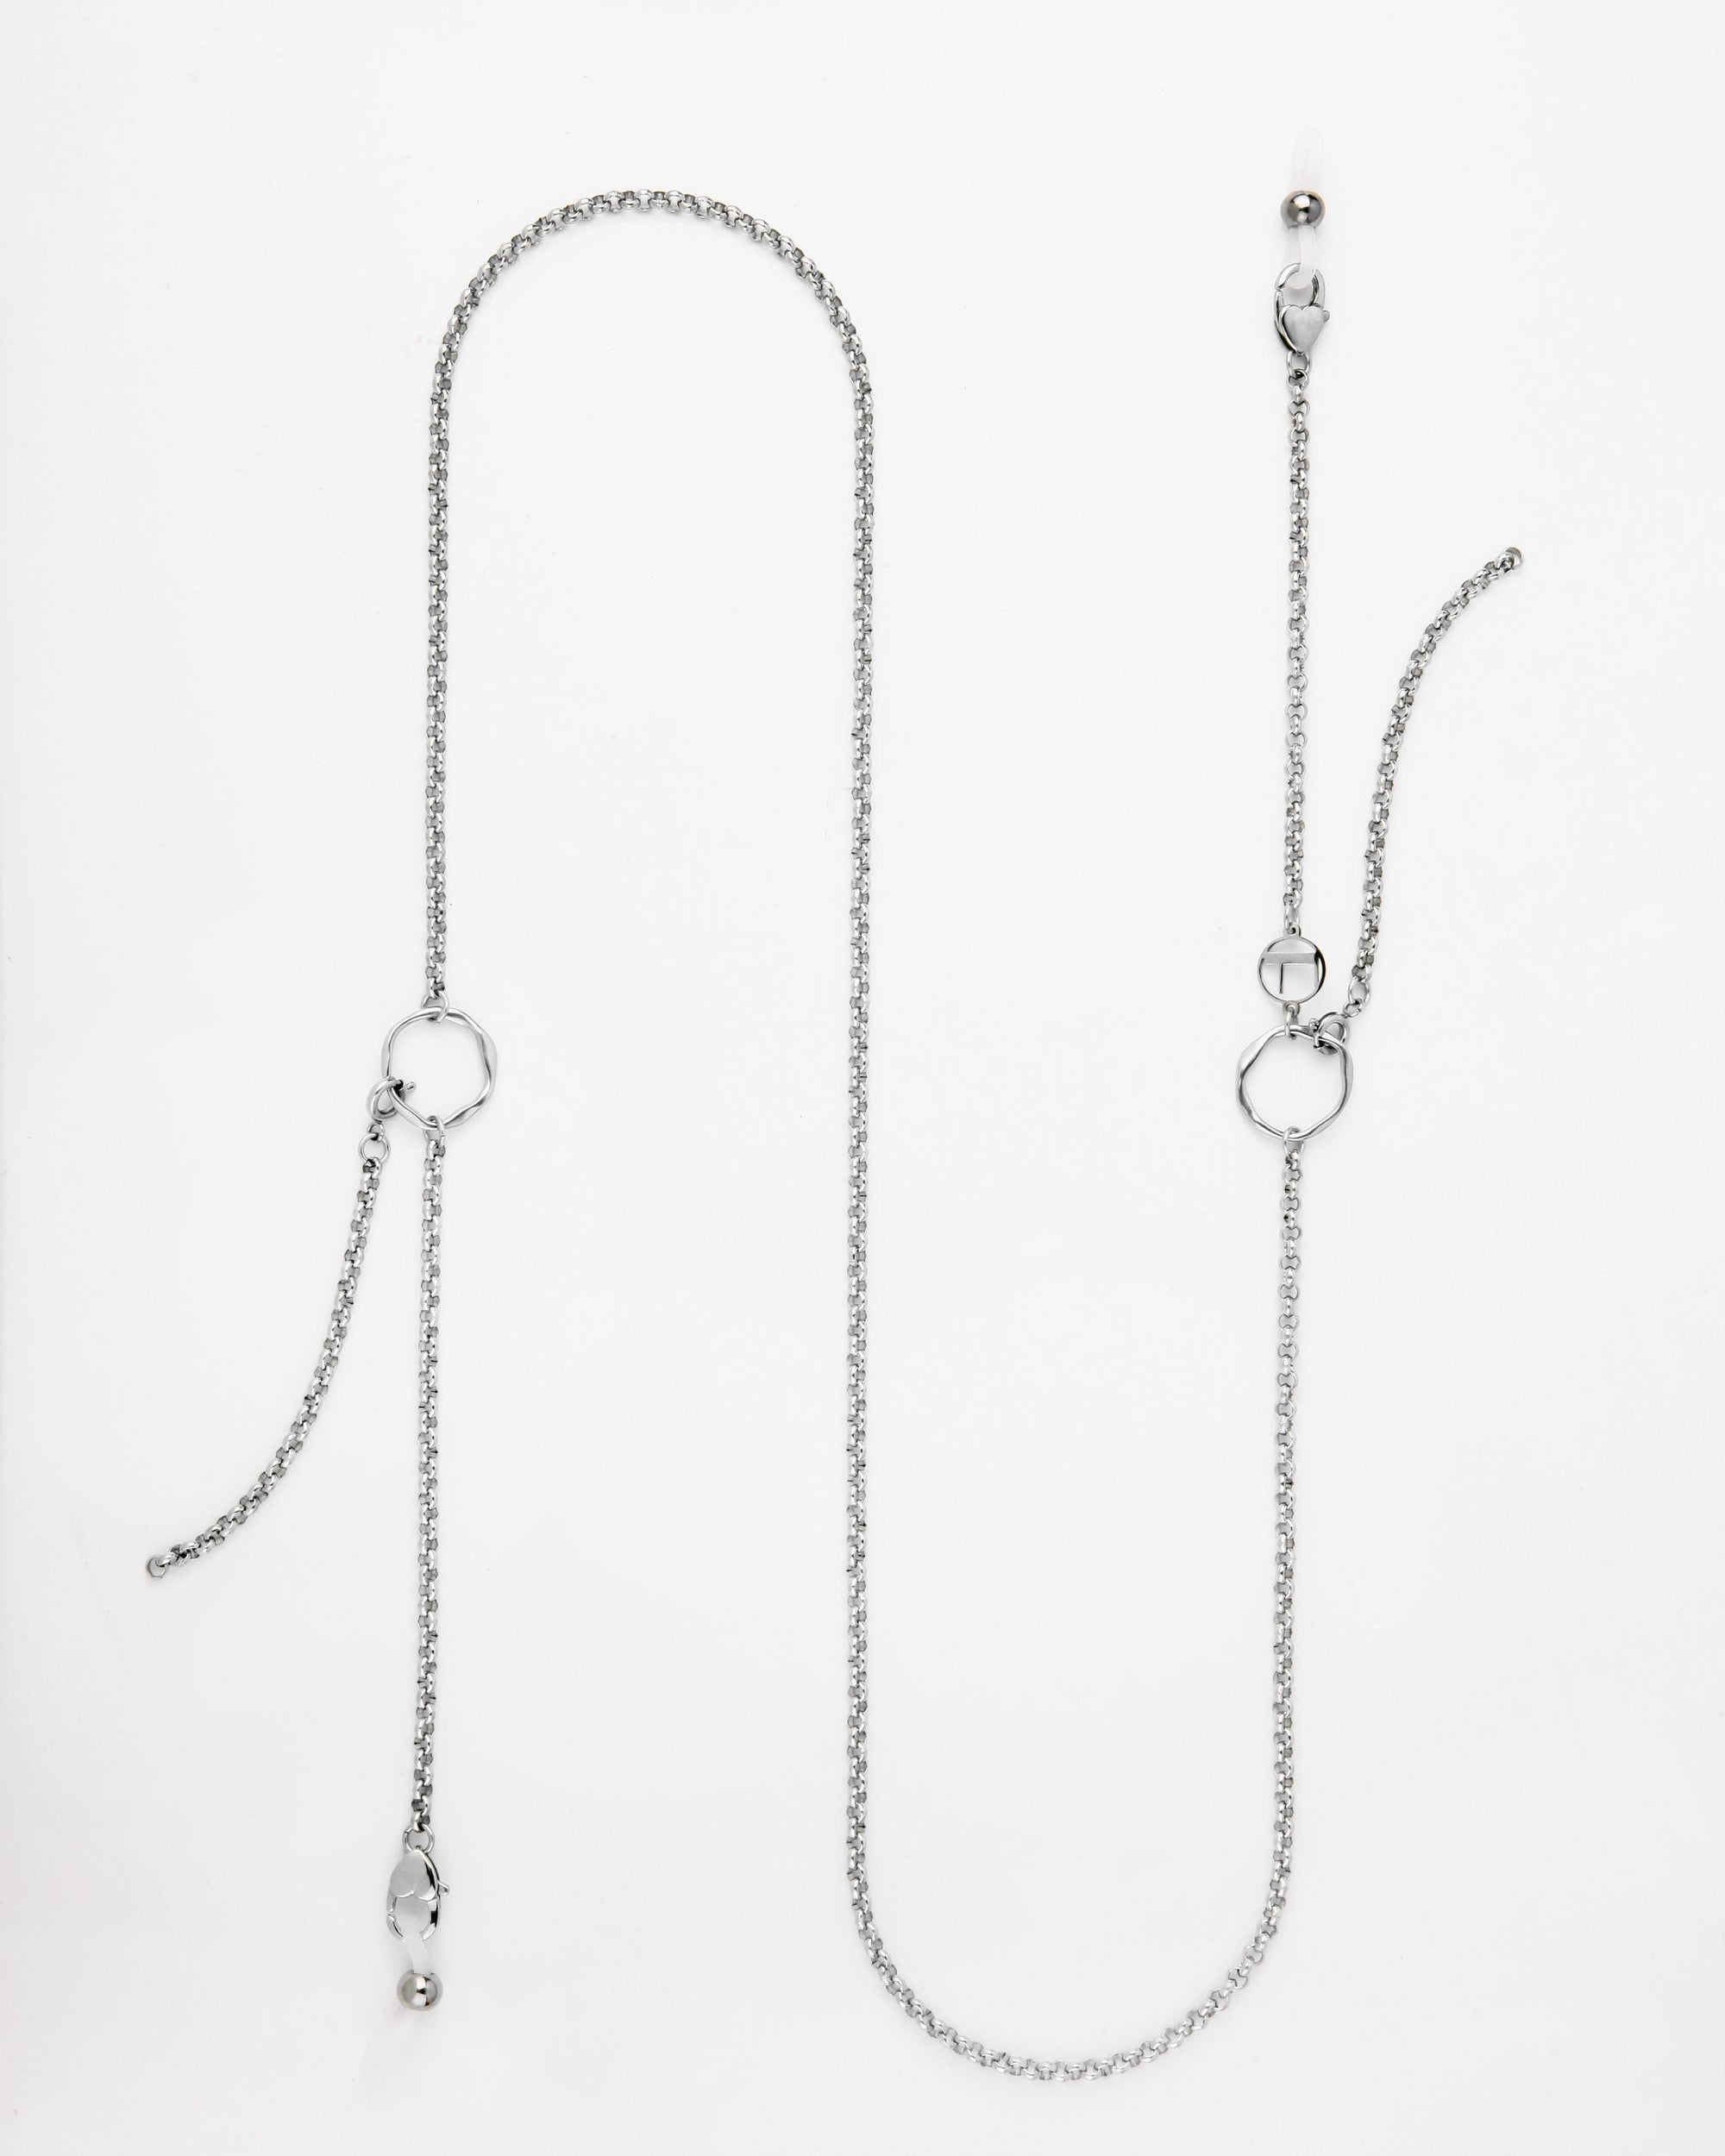 This image shows a long, delicate Florentina Glasses Chain by For Art&#39;s Sake®. The chain features two small geometric pendants and two dangling ends, each embellished with a small silver or pearl-like bead. The necklace is laid out flat against a plain white background.